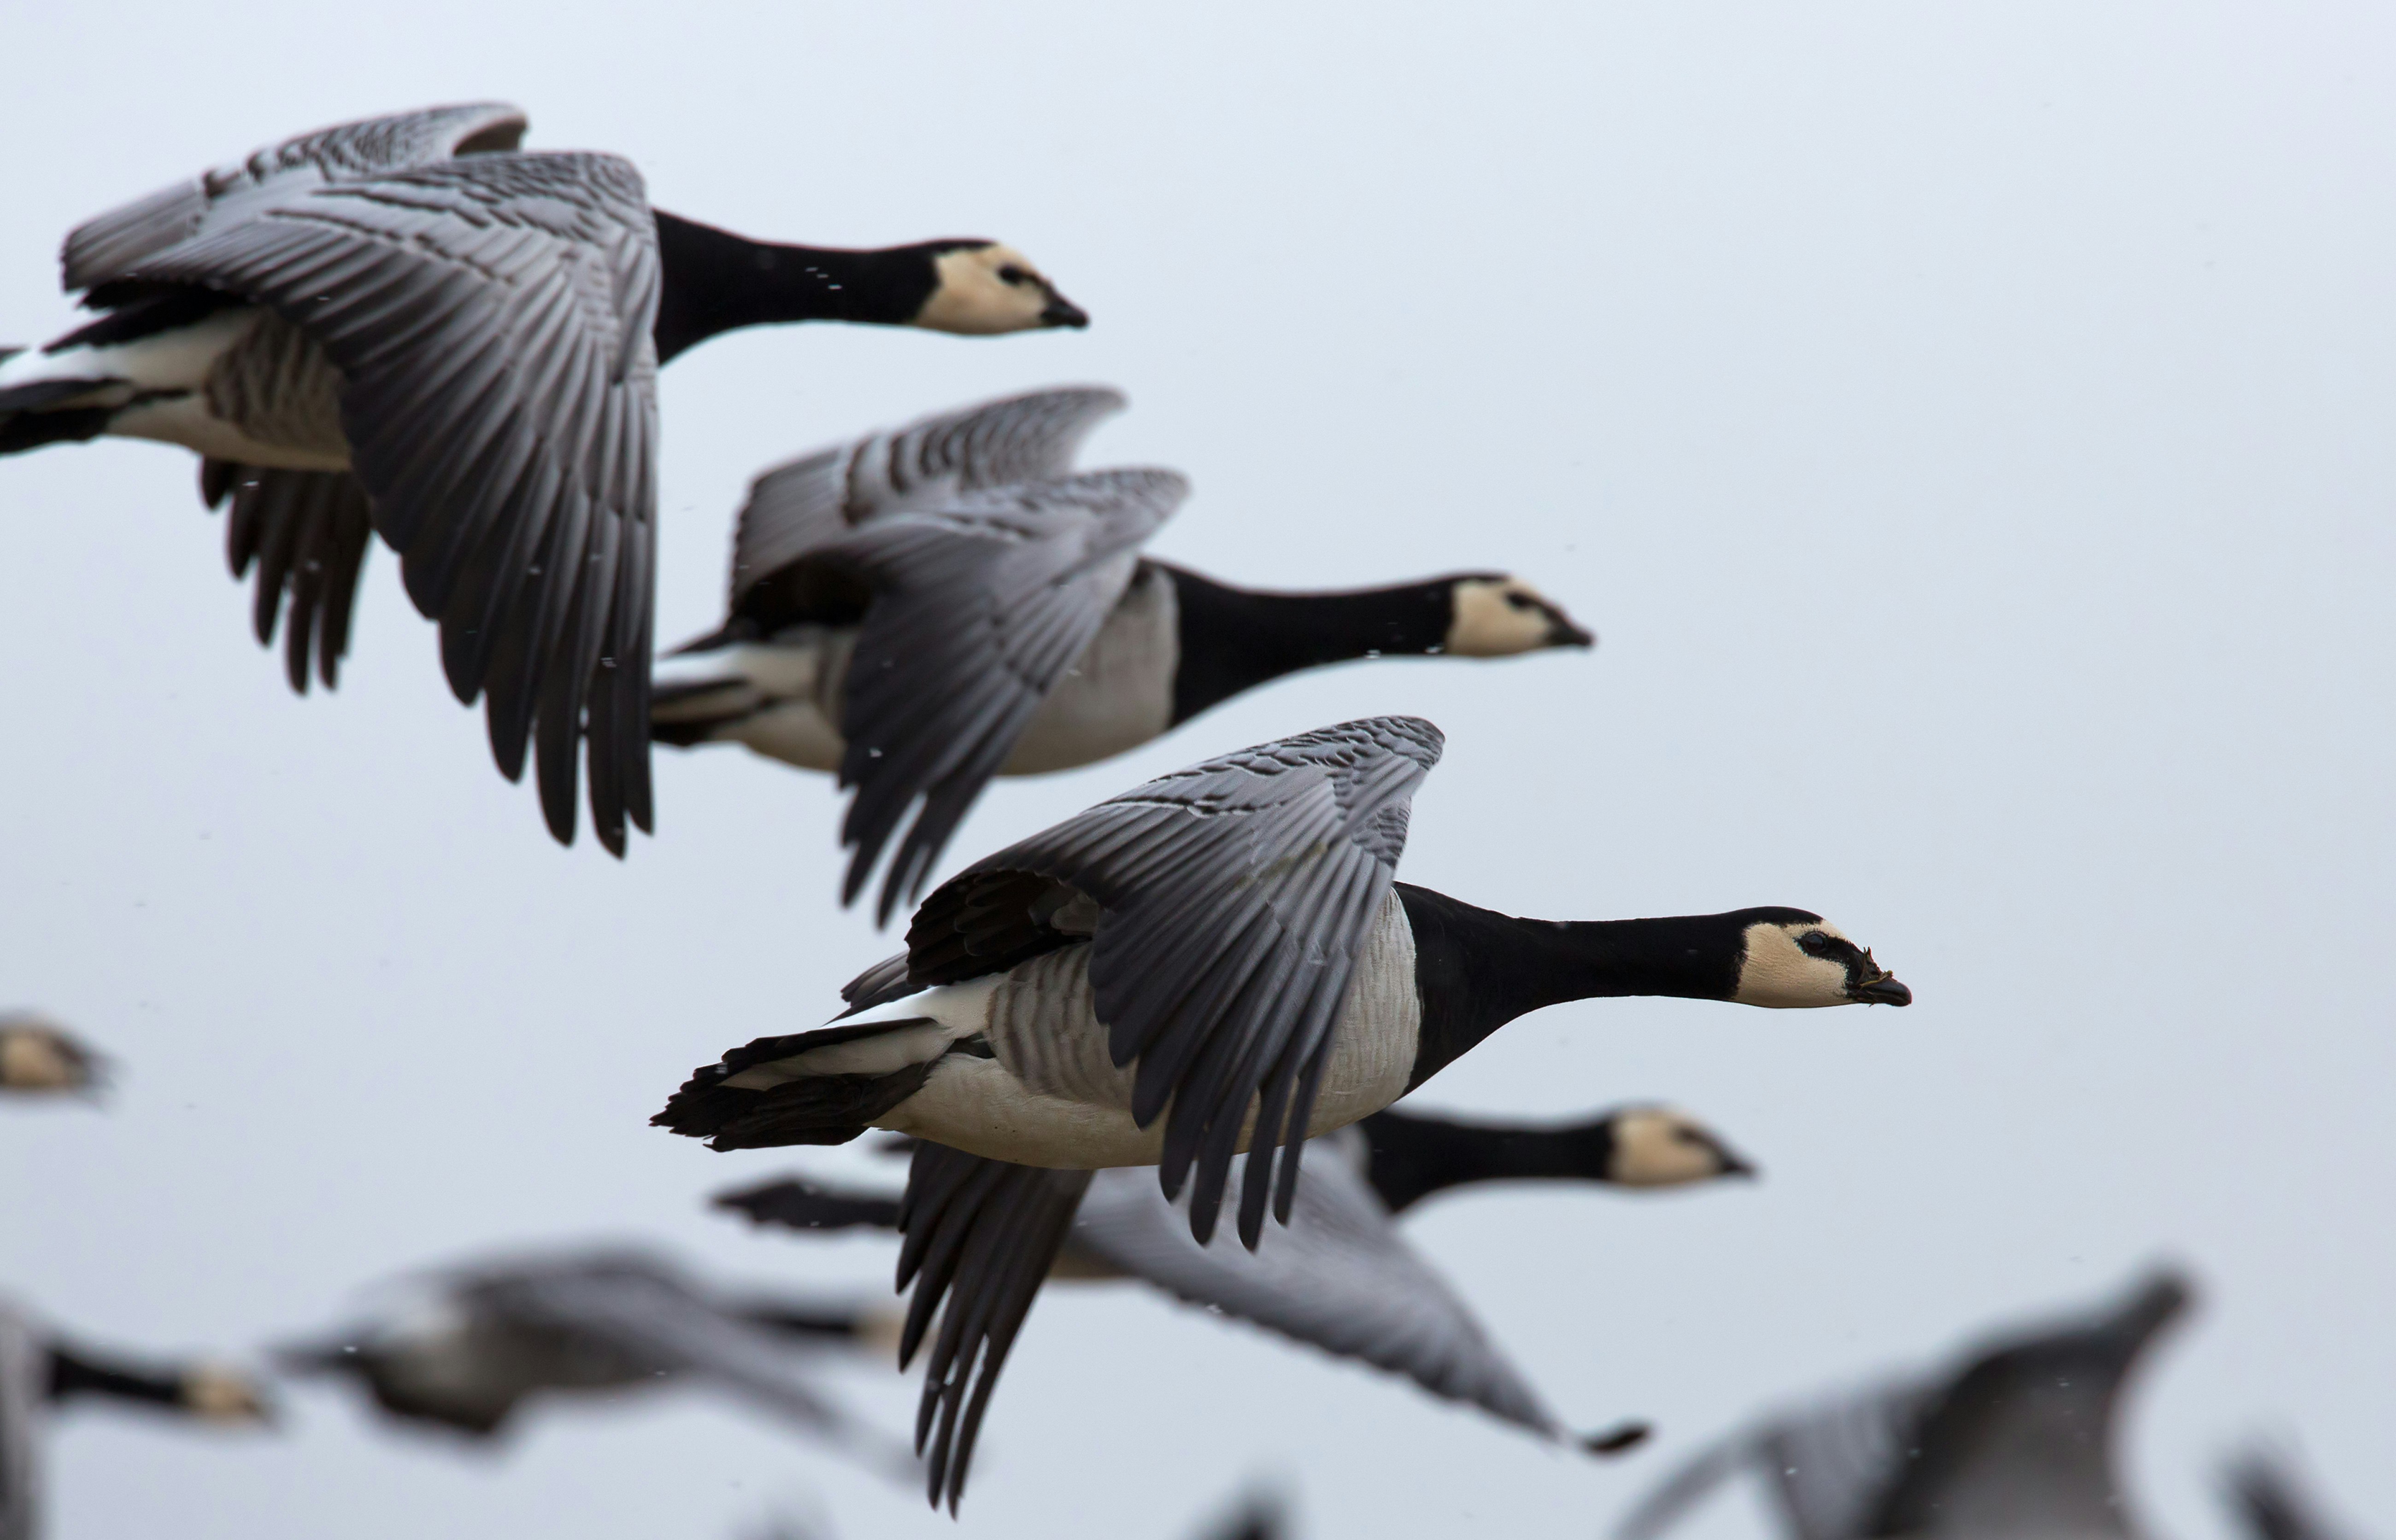 A close up shot of four brent geese in flight, abreast of each other. There are other geese out of focus in the background. 